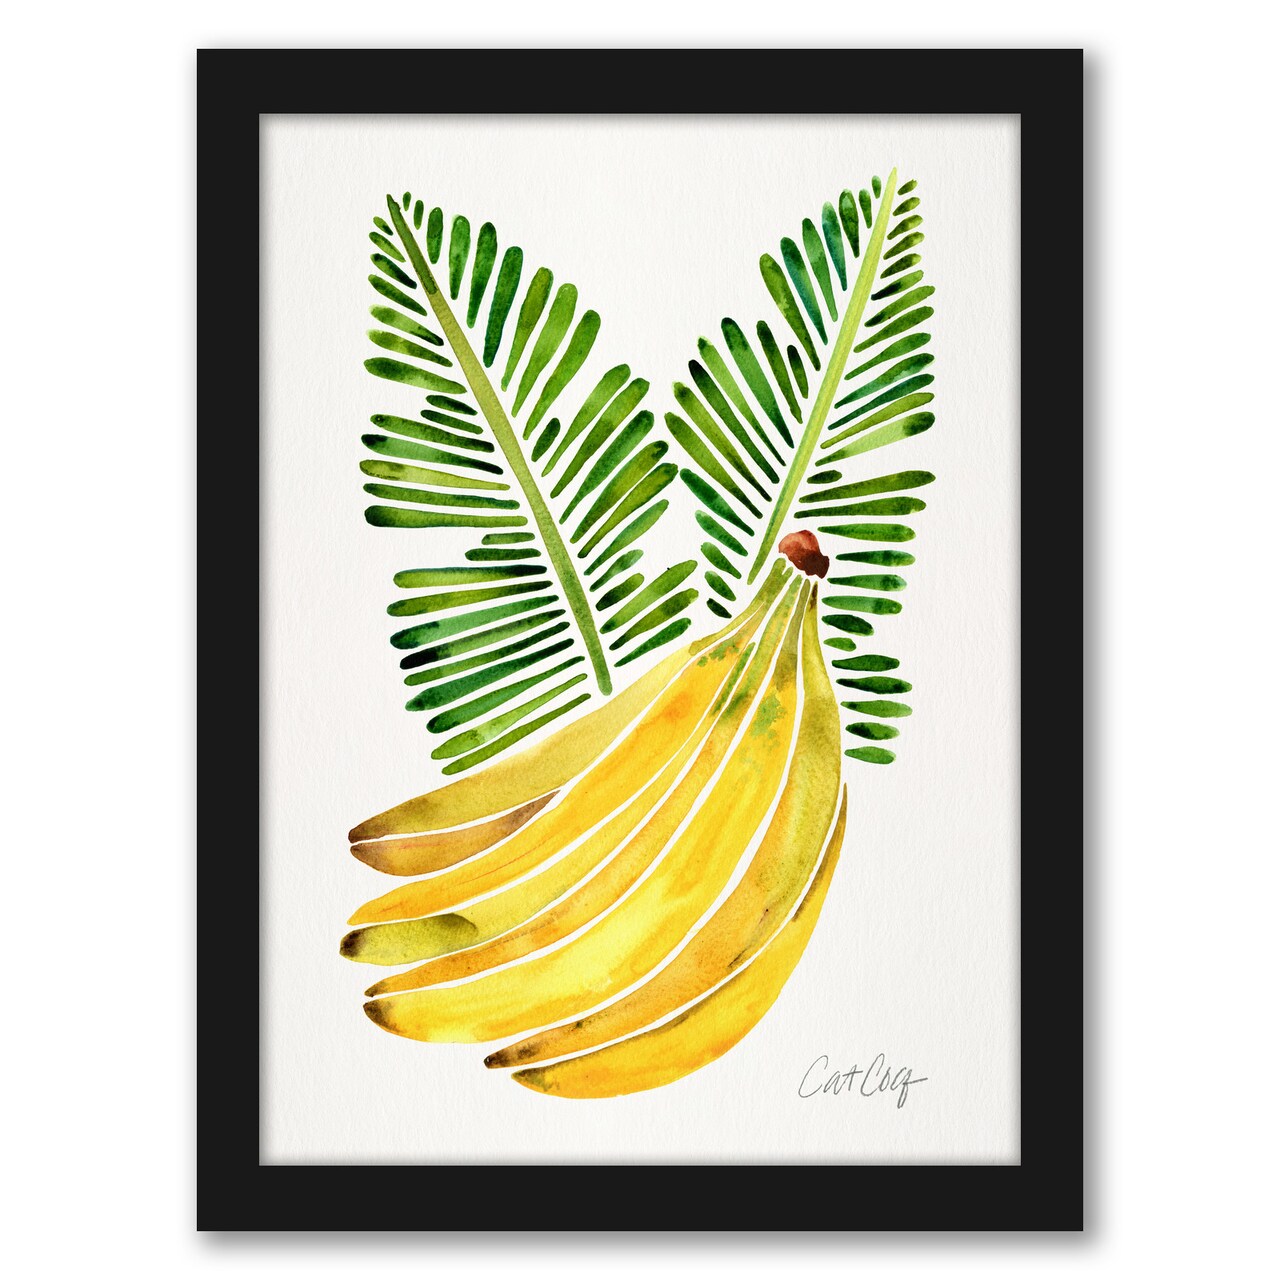 Banana Bunch by Cat Coquillette Frame  - Americanflat